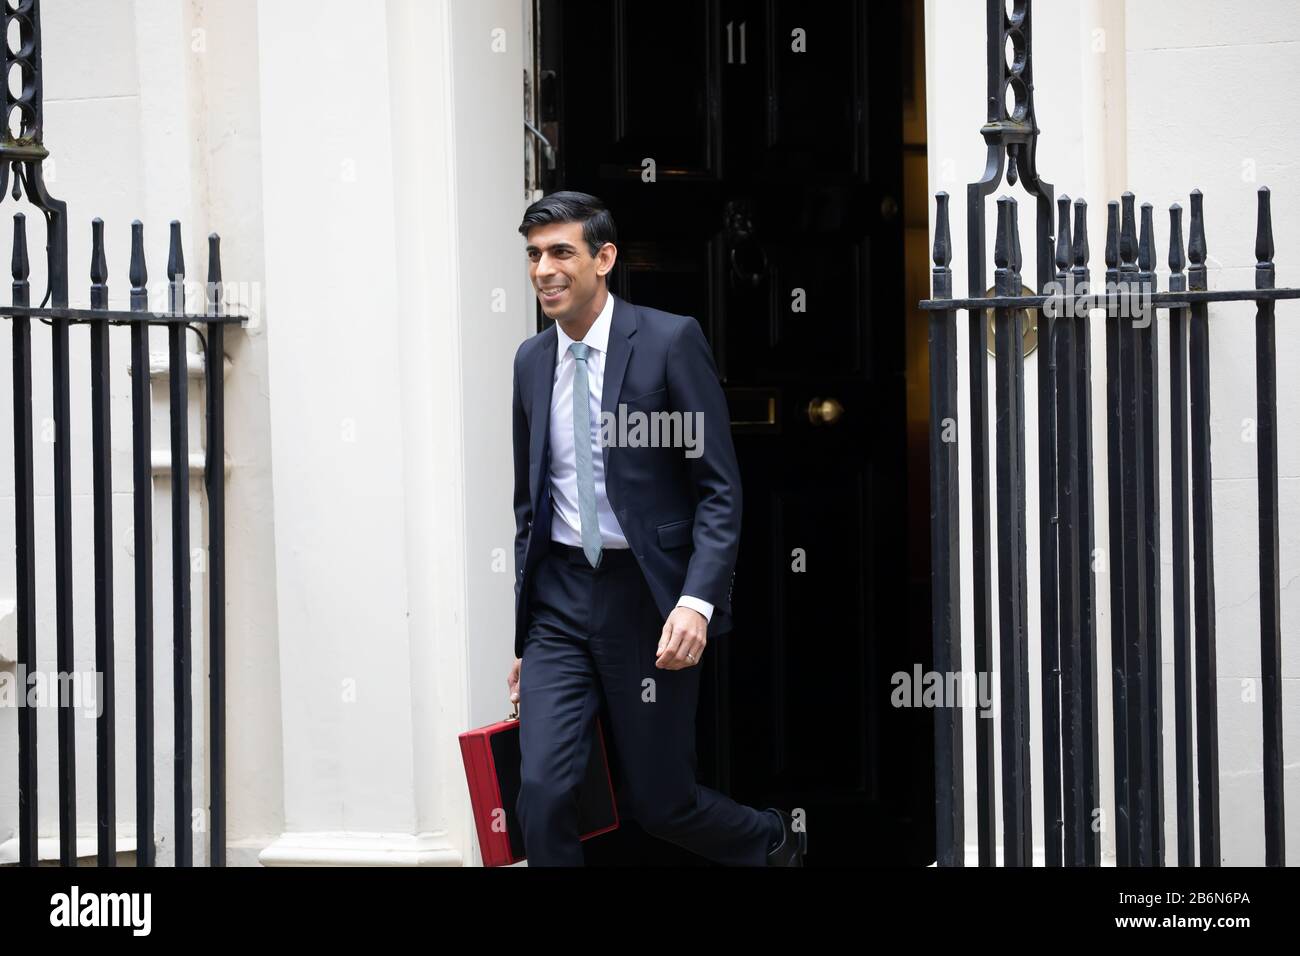 Chancellor of the Exchequer, The Rt Hon Rishi Sunak MP leaves Downing Street to deliver his Budget Speech Stock Photo